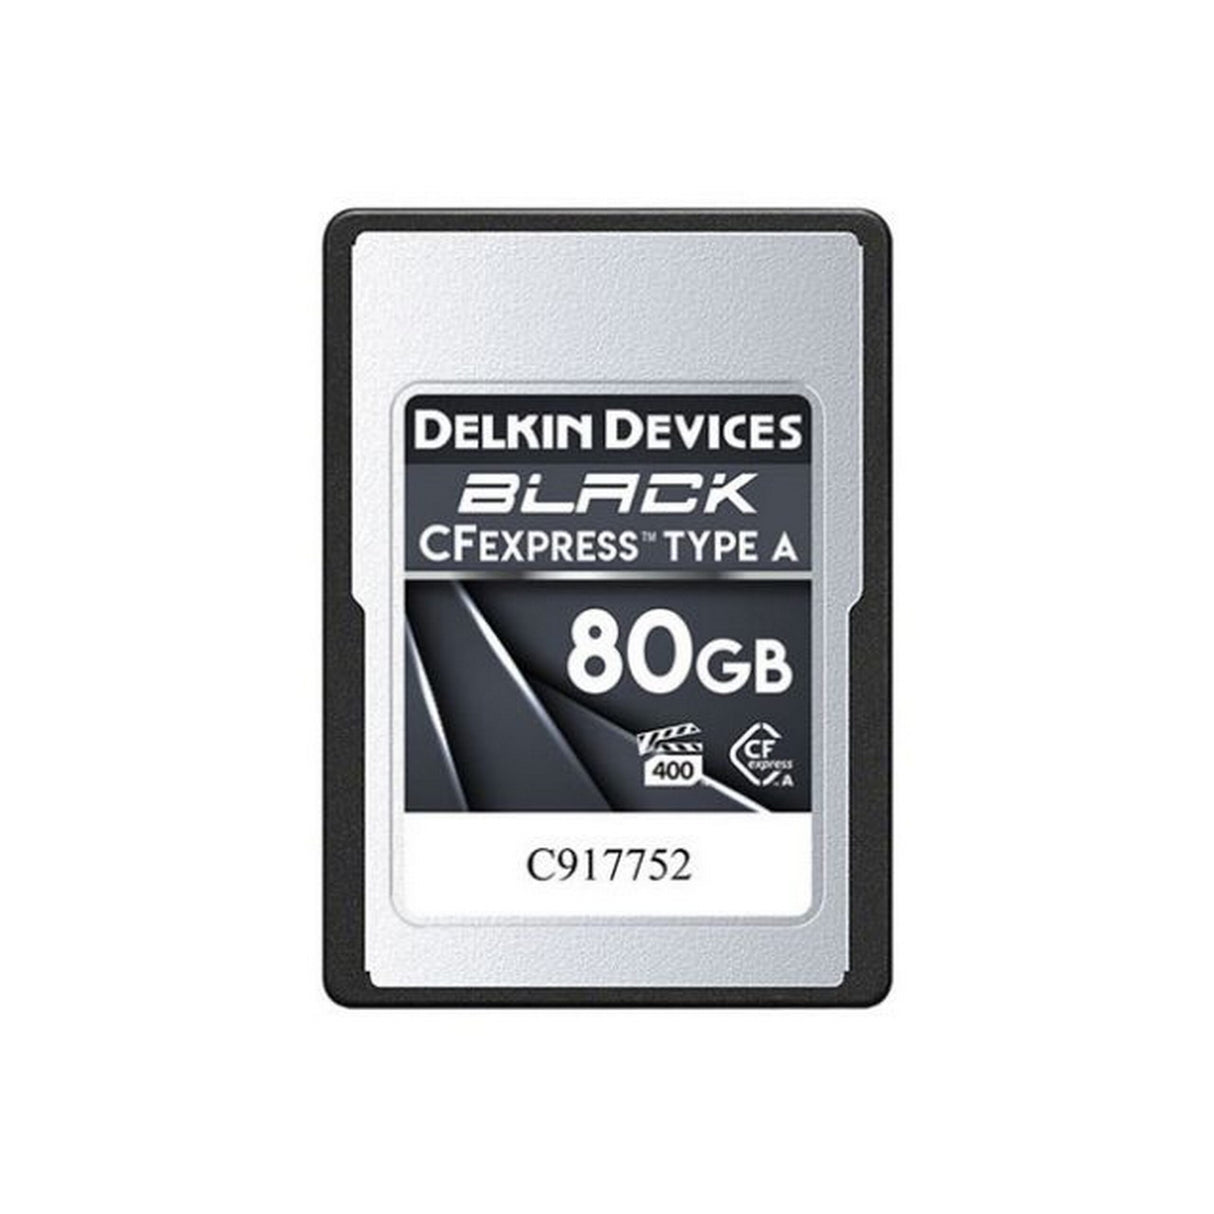 Delkin Devices BLACK CFexpress Type A Memory Card, 80GB